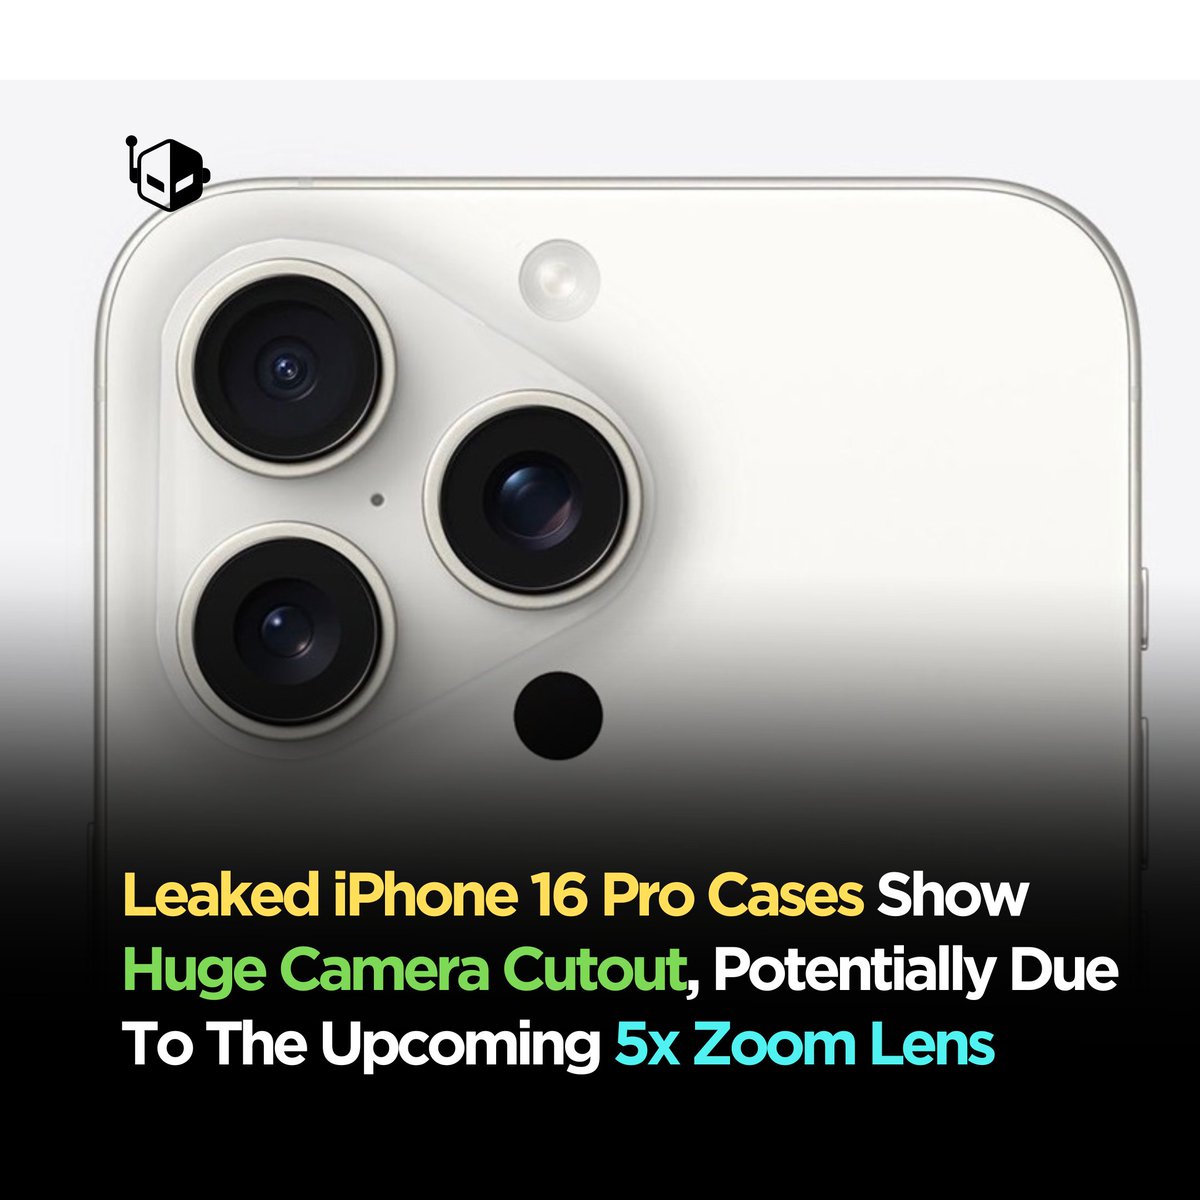 Leaked iPhone 16 Pro cases show gigantic camera cutout, possibly the same size as the Pro Max wccftech.com/iphone-16-pro-…